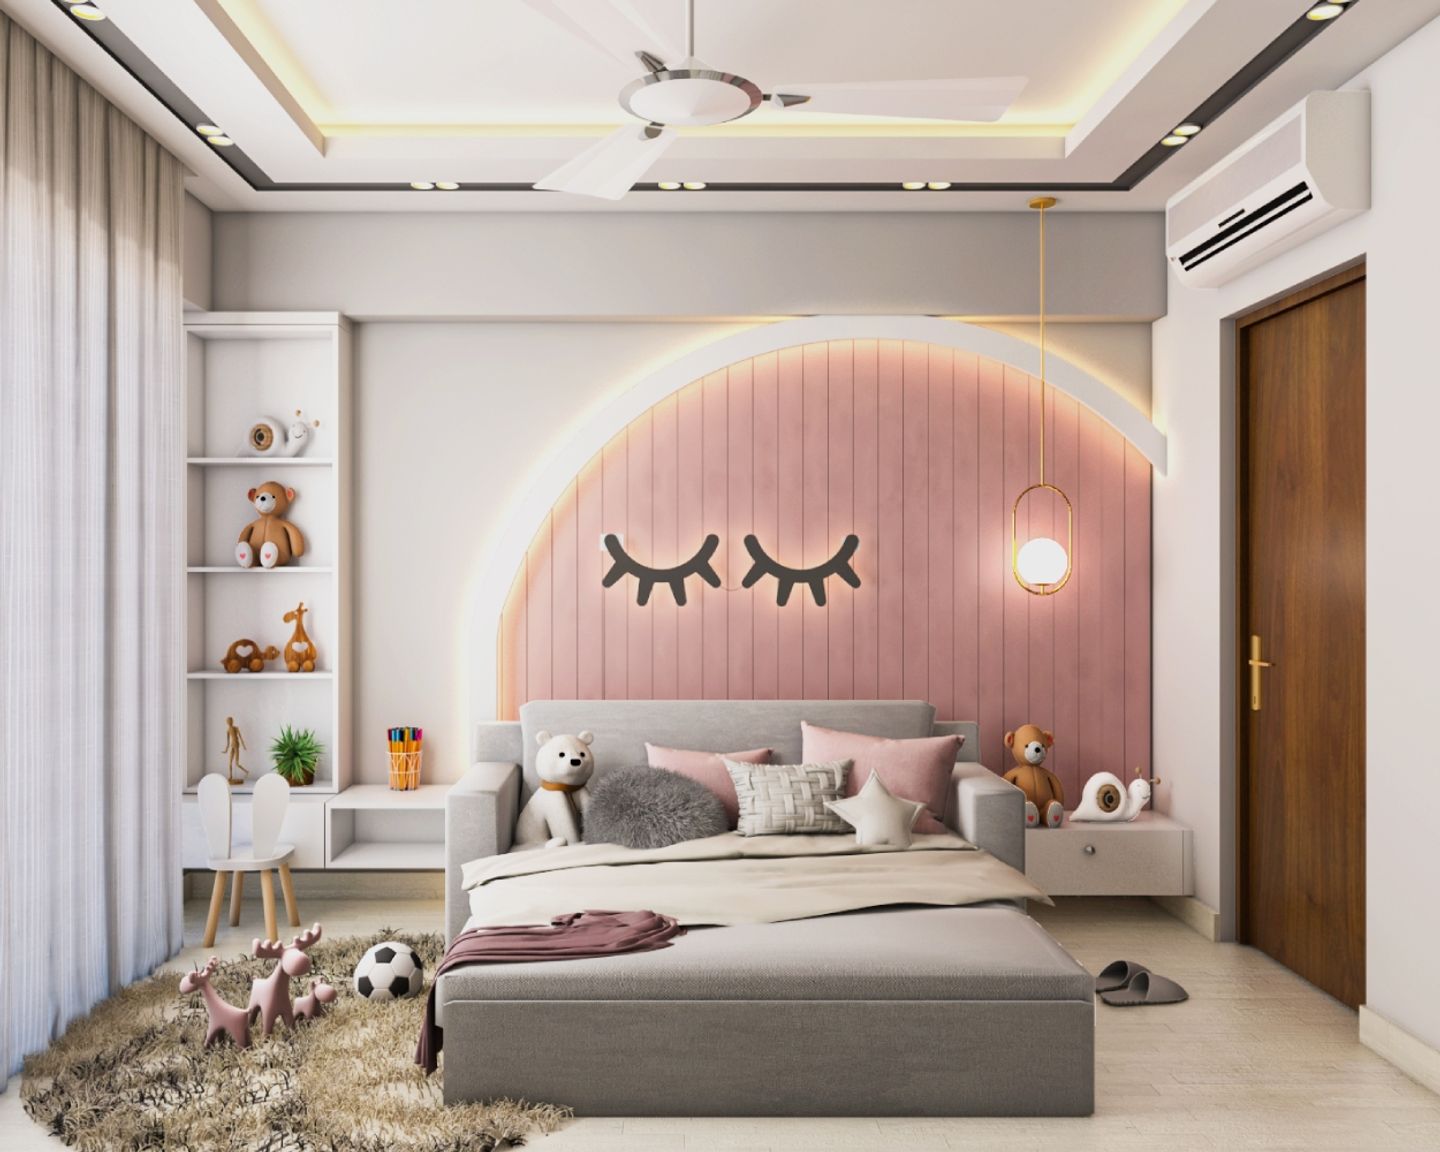 Kids Bedroom Design With Arc Pink Panels And White Frame - Livspace